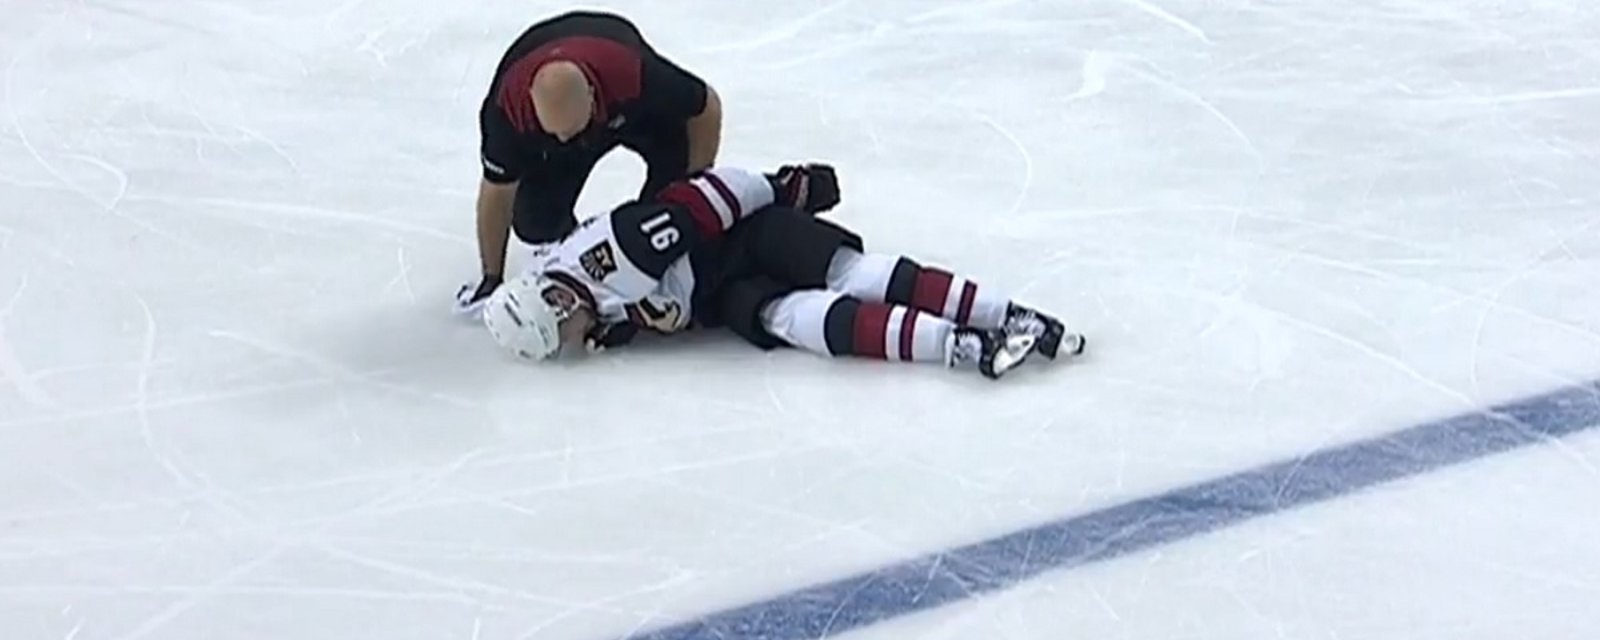 NHLer taken to hospital tonight after high-impact hit knocks him out cold.